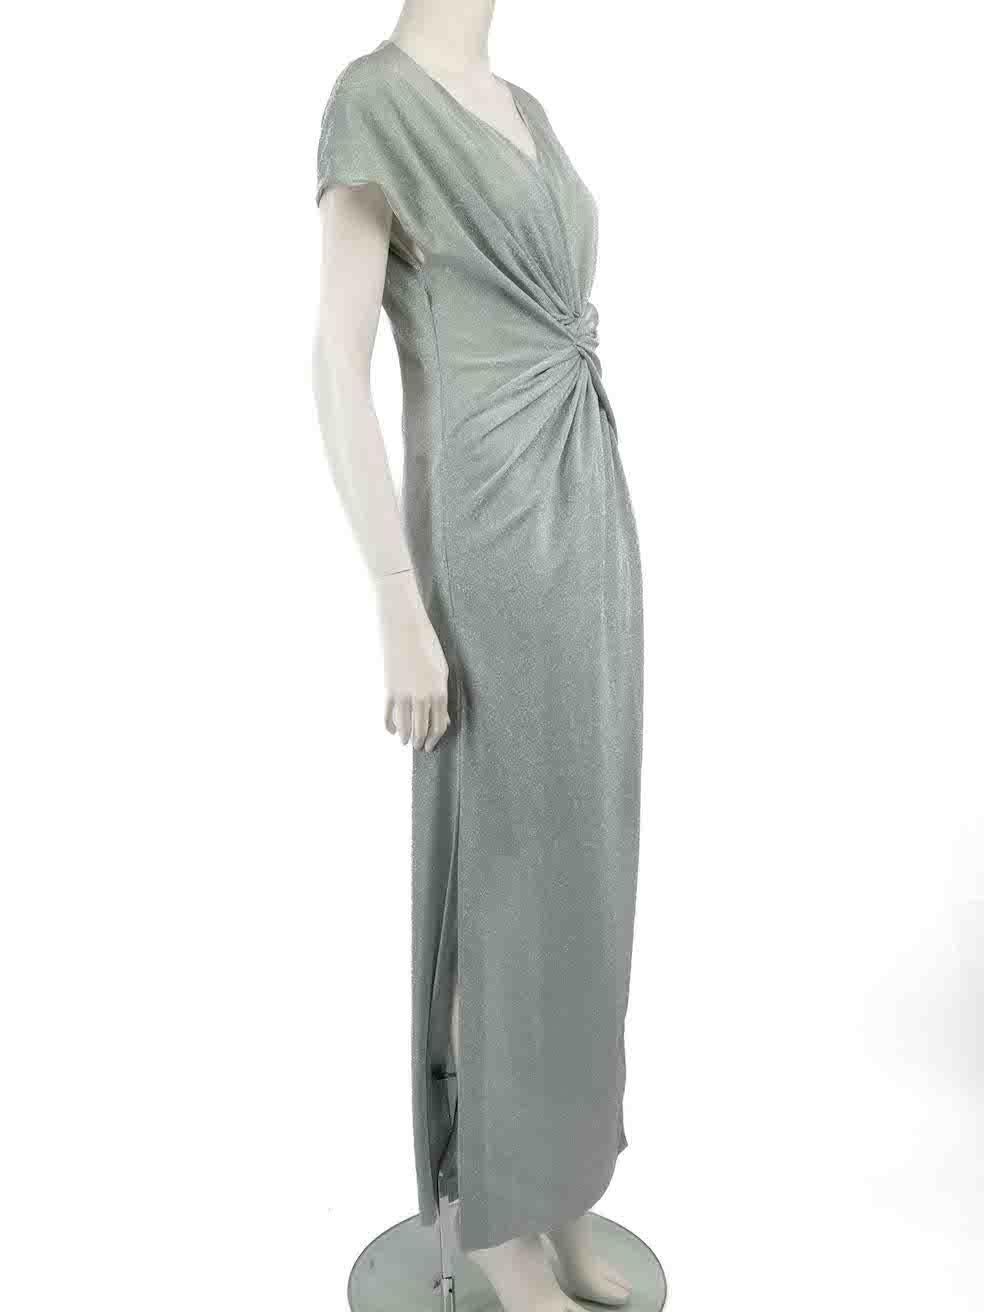 CONDITION is Very good. Hardly any visible wear to dress is evident on this used Lanvin designer resale item.
 
 
 
 Details
 
 
 Silver
 
 Synthetic
 
 Dress
 
 Metallic thread
 
 Ruched detail
 
 Round neck
 
 Short sleeves
 
 Midi
 
 Side zip